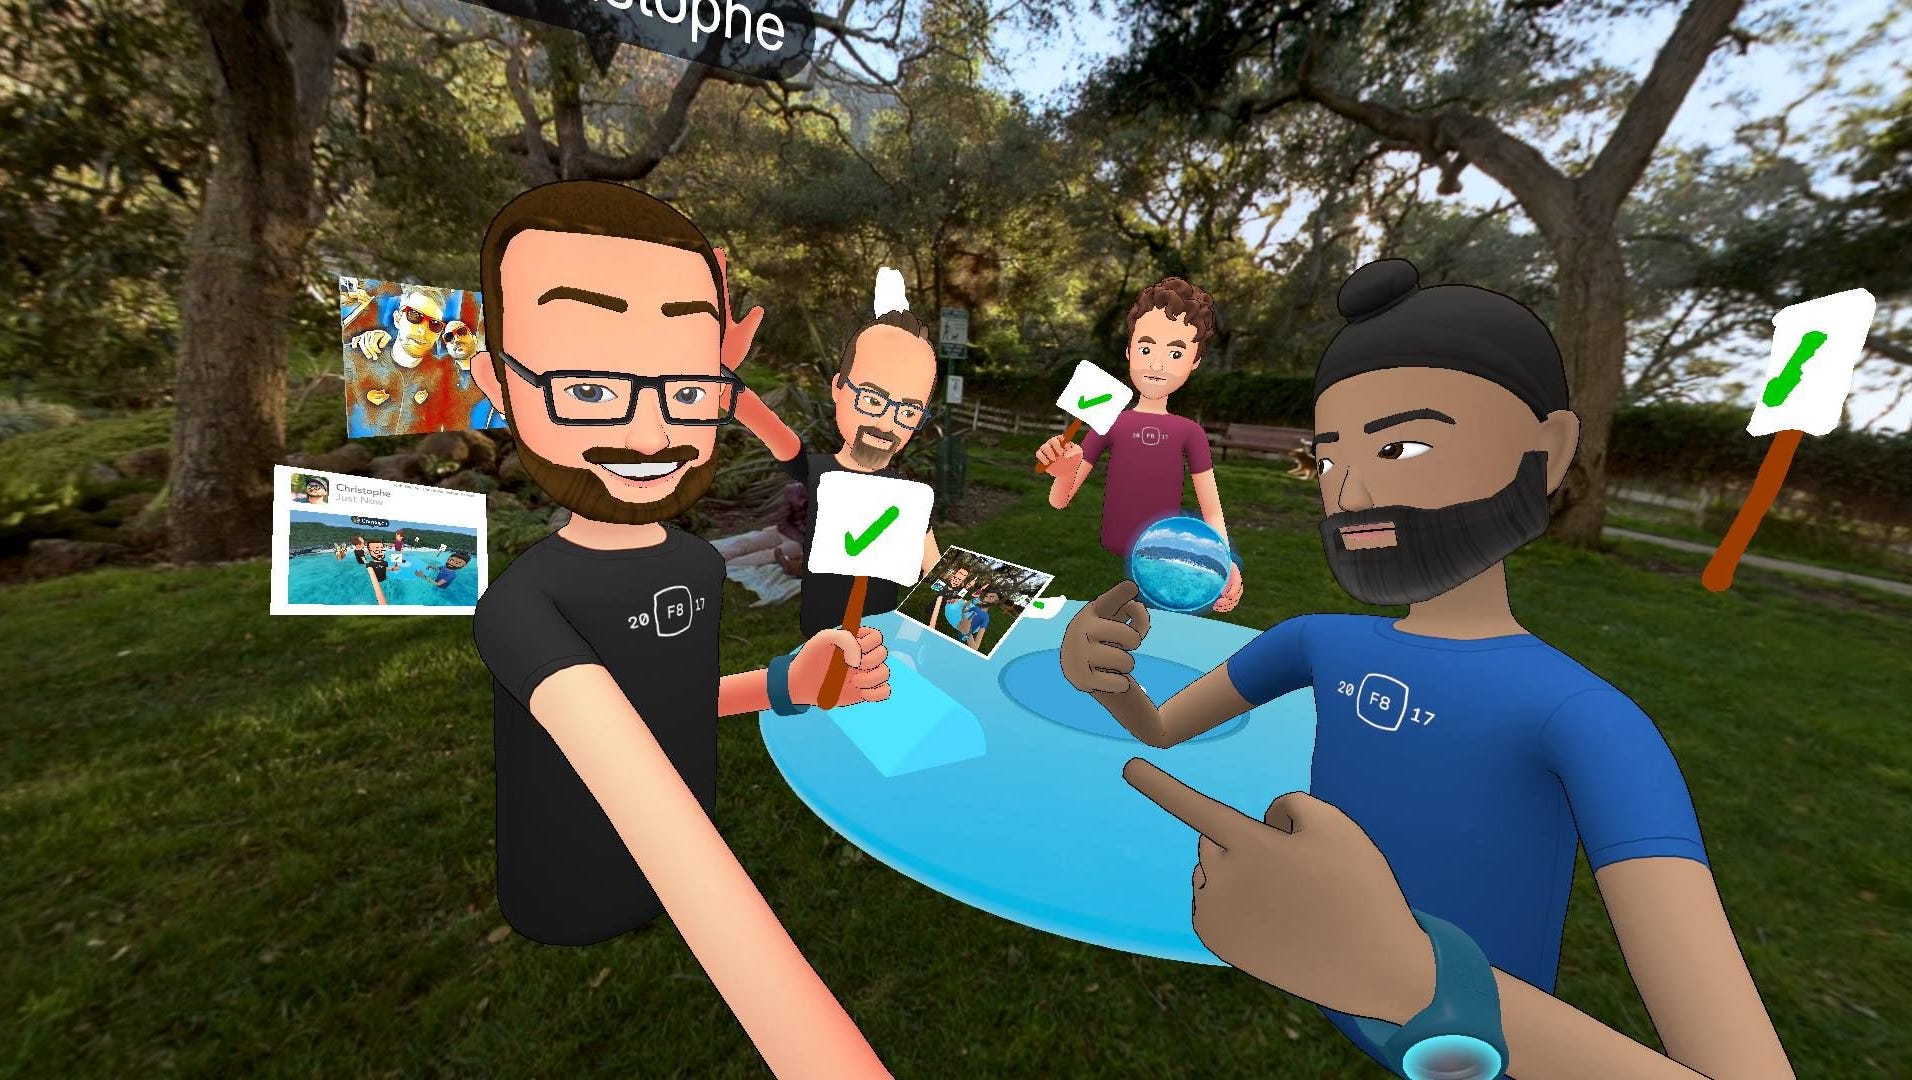 Your friends (and you) become cartoon avatars in Facebook virtual reality